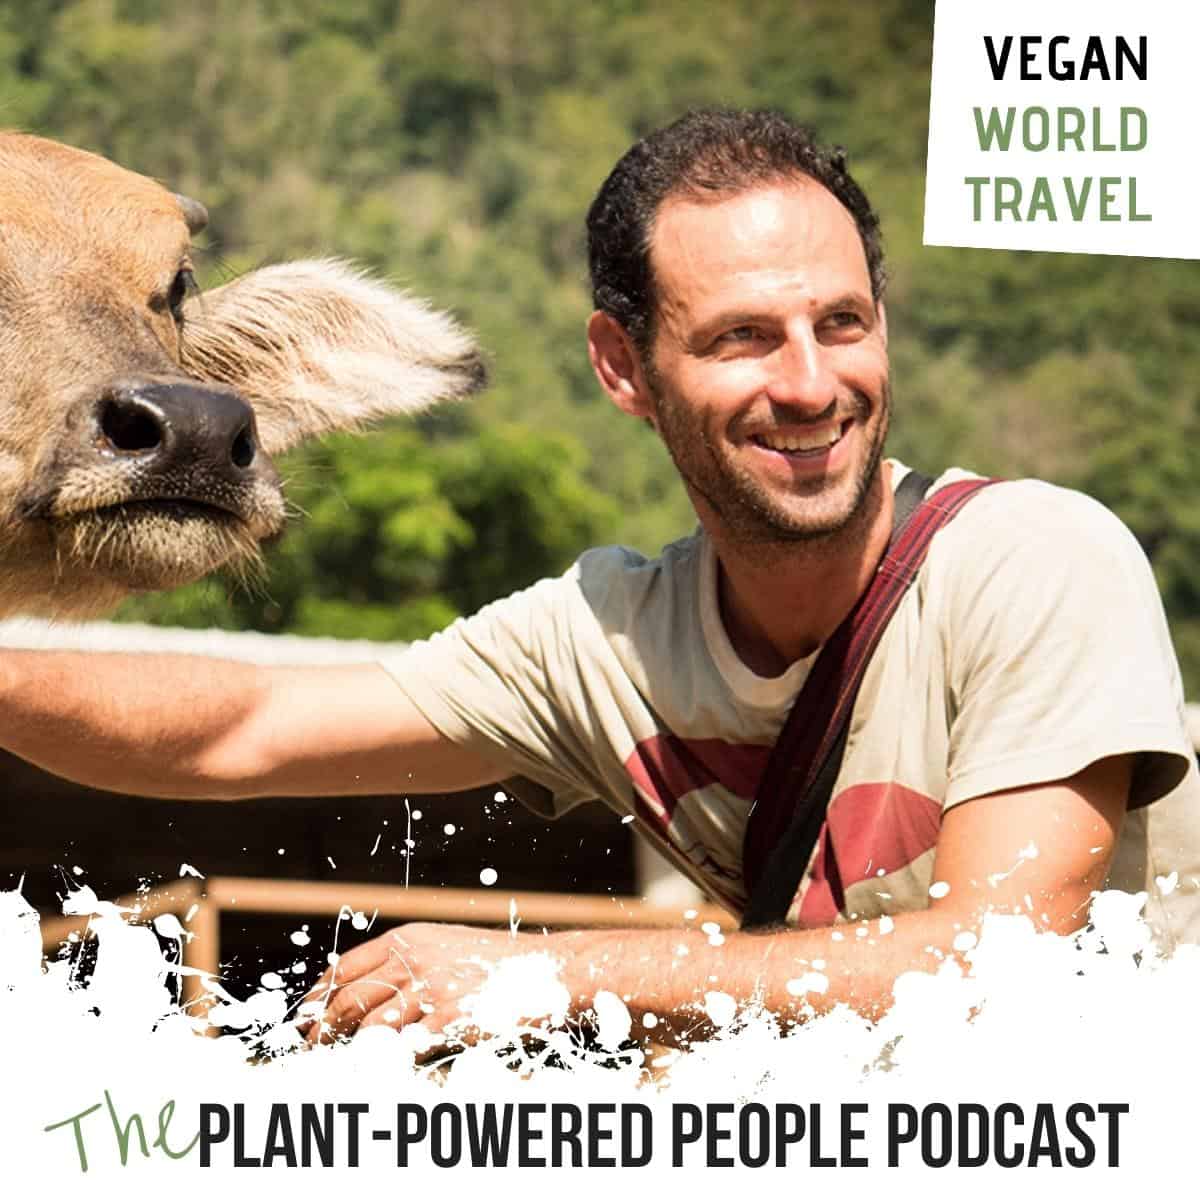 Plant-Powered People Podcast episode graphic featuring Lucas Spiegel with a cow.